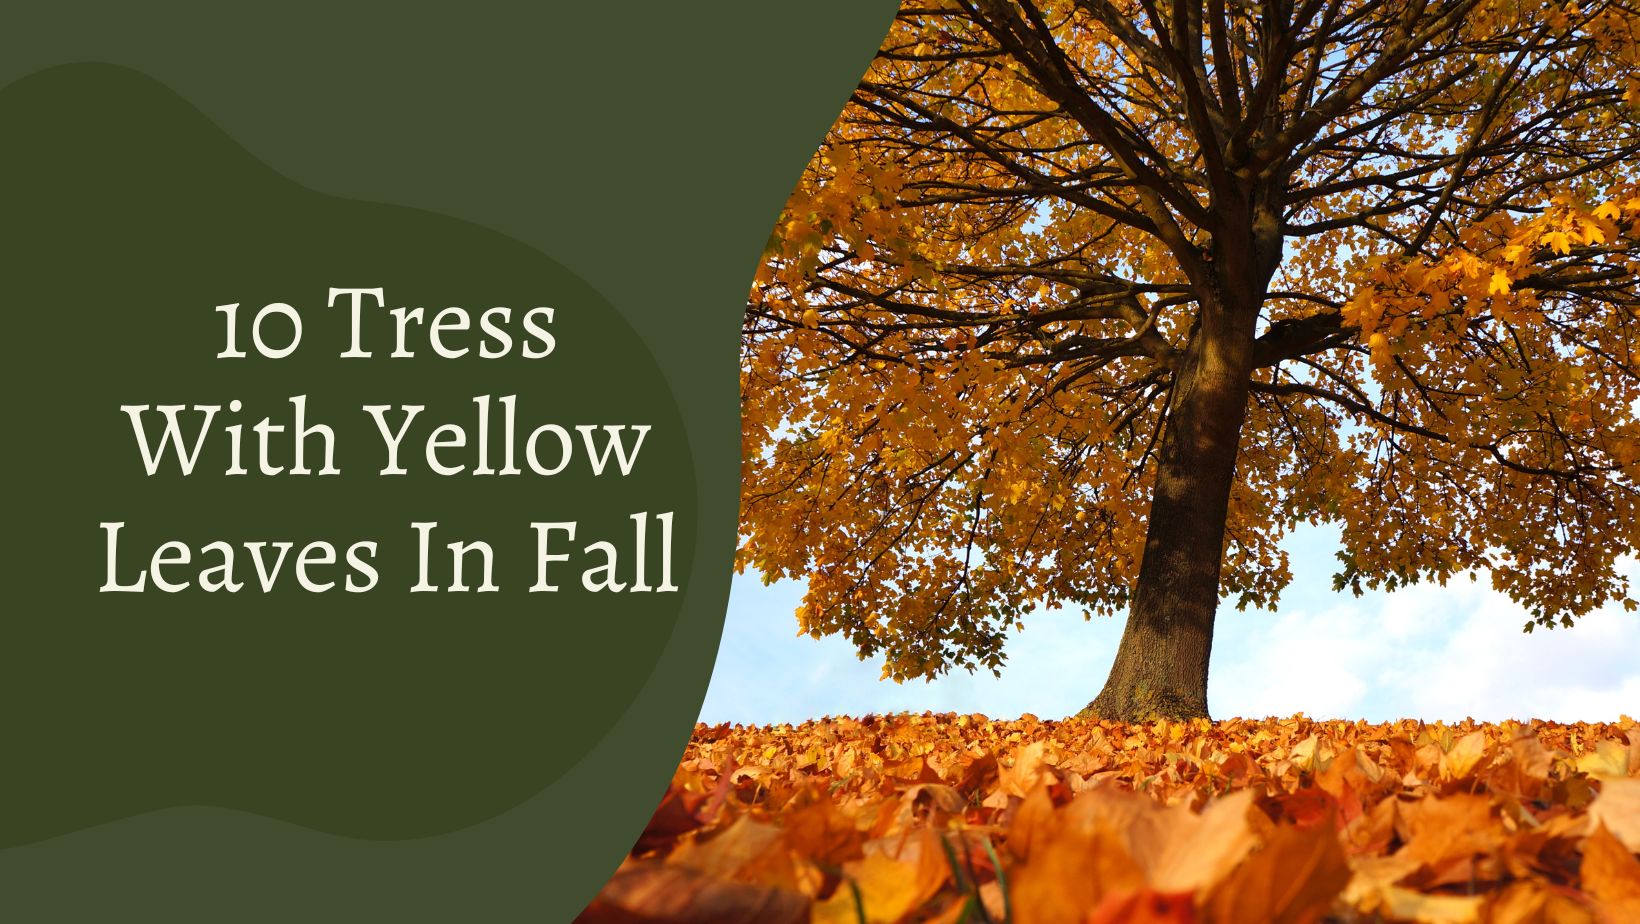 Tress With Yellow Leaves In Fall